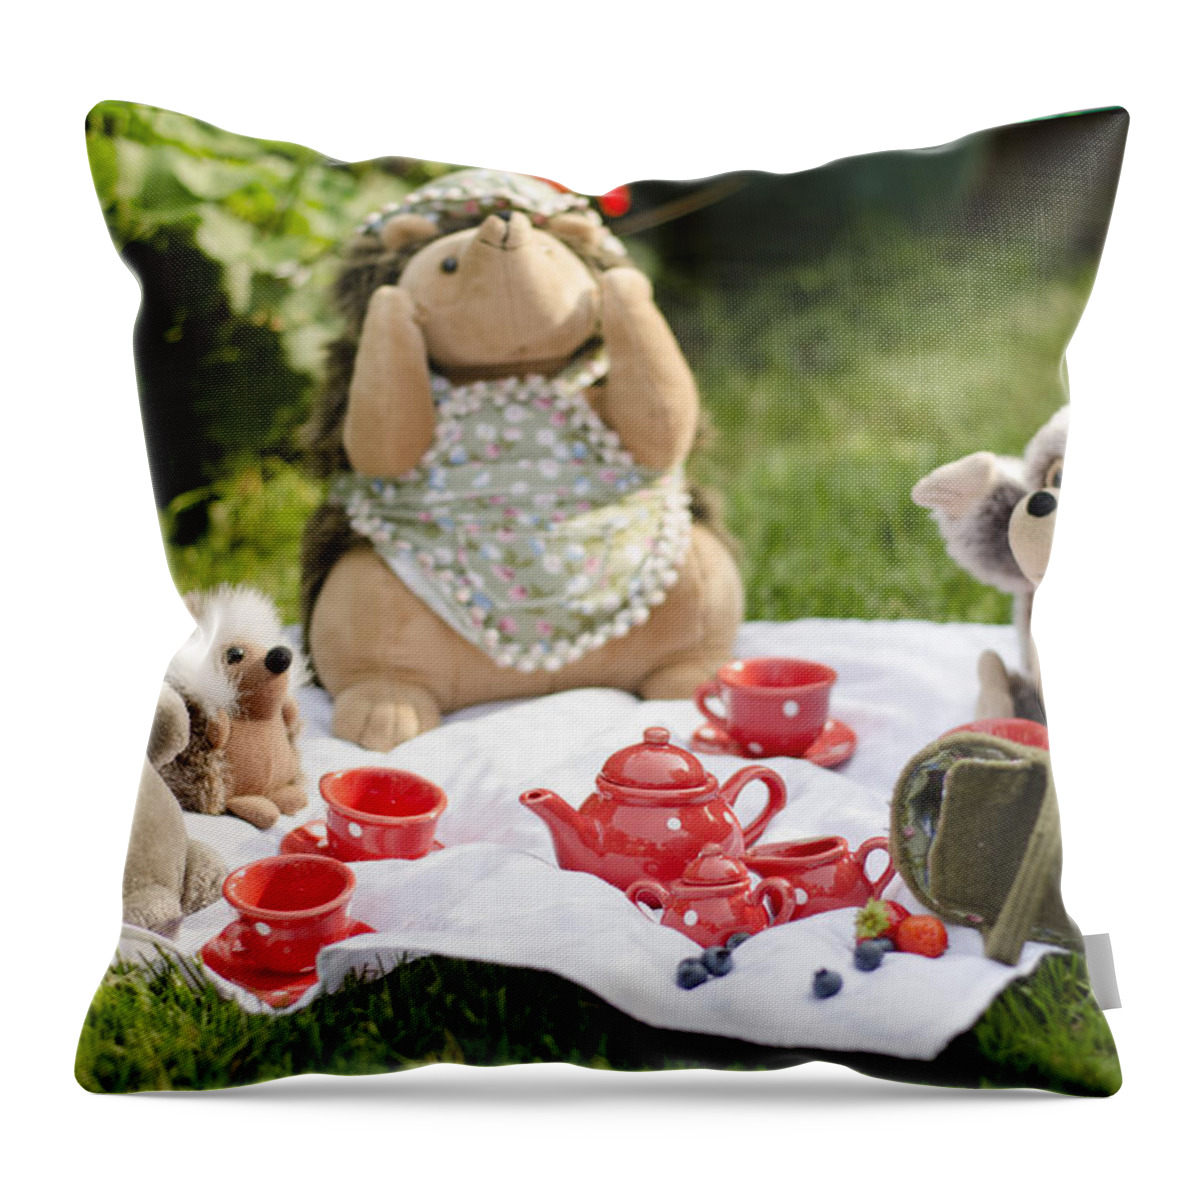 Mrs. Hedgie Throw Pillow featuring the photograph Picnic Tales by Spikey Mouse Photography